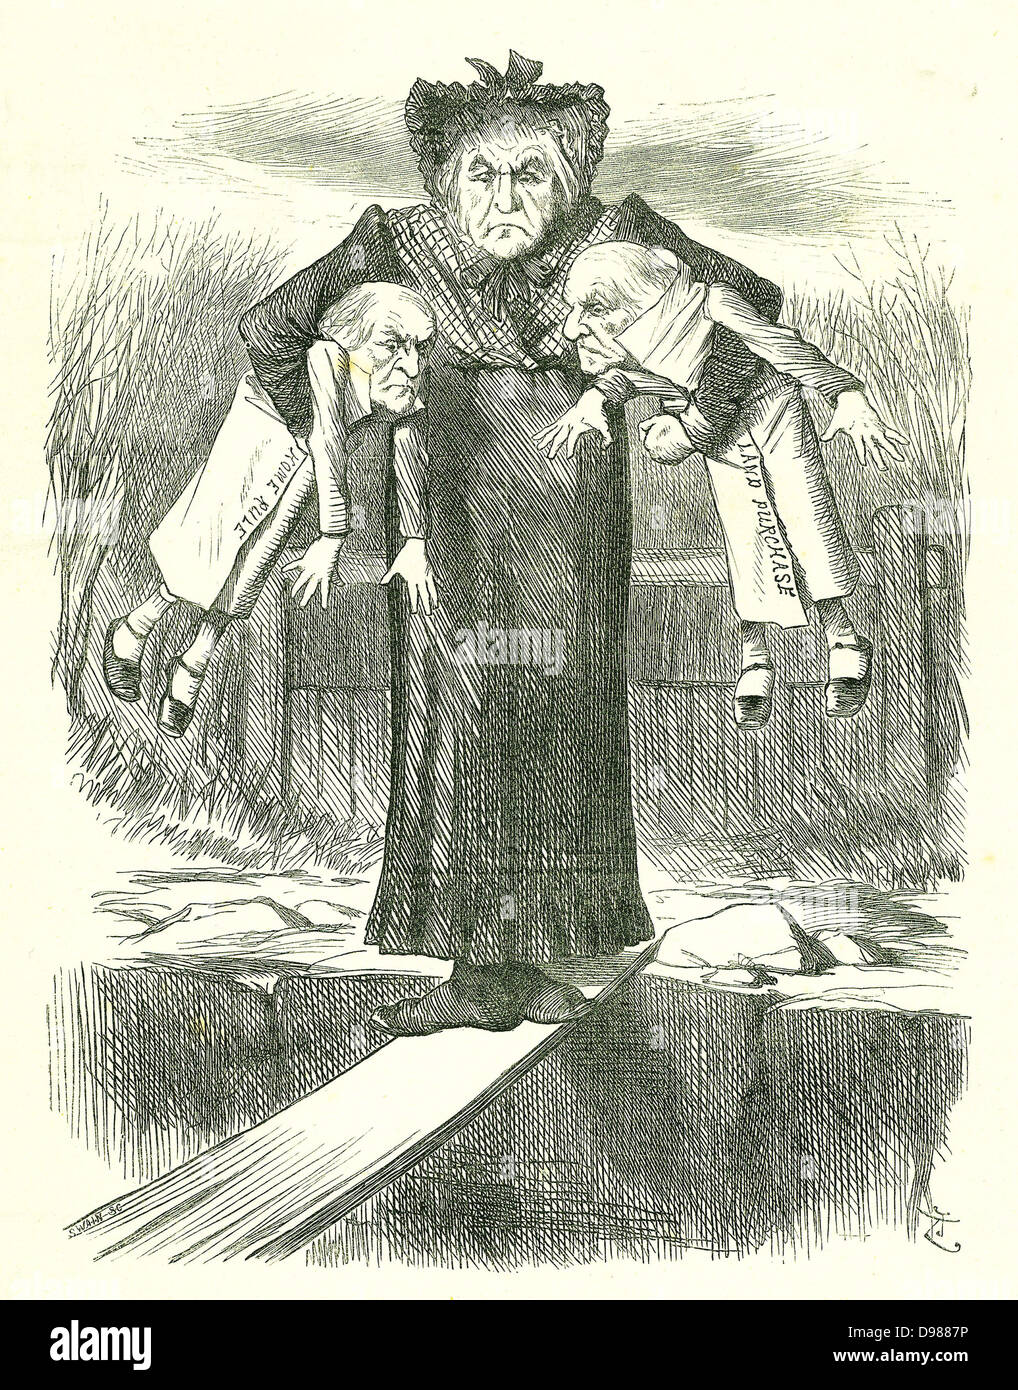 Set Down Two, and Carry One.'?: Gladstone, the British Prime Minister, in a quandary over which of the controversial Irish bills to jettison. John Tenniel cartoon from 'Punch', London, 3 April 1886. Stock Photo